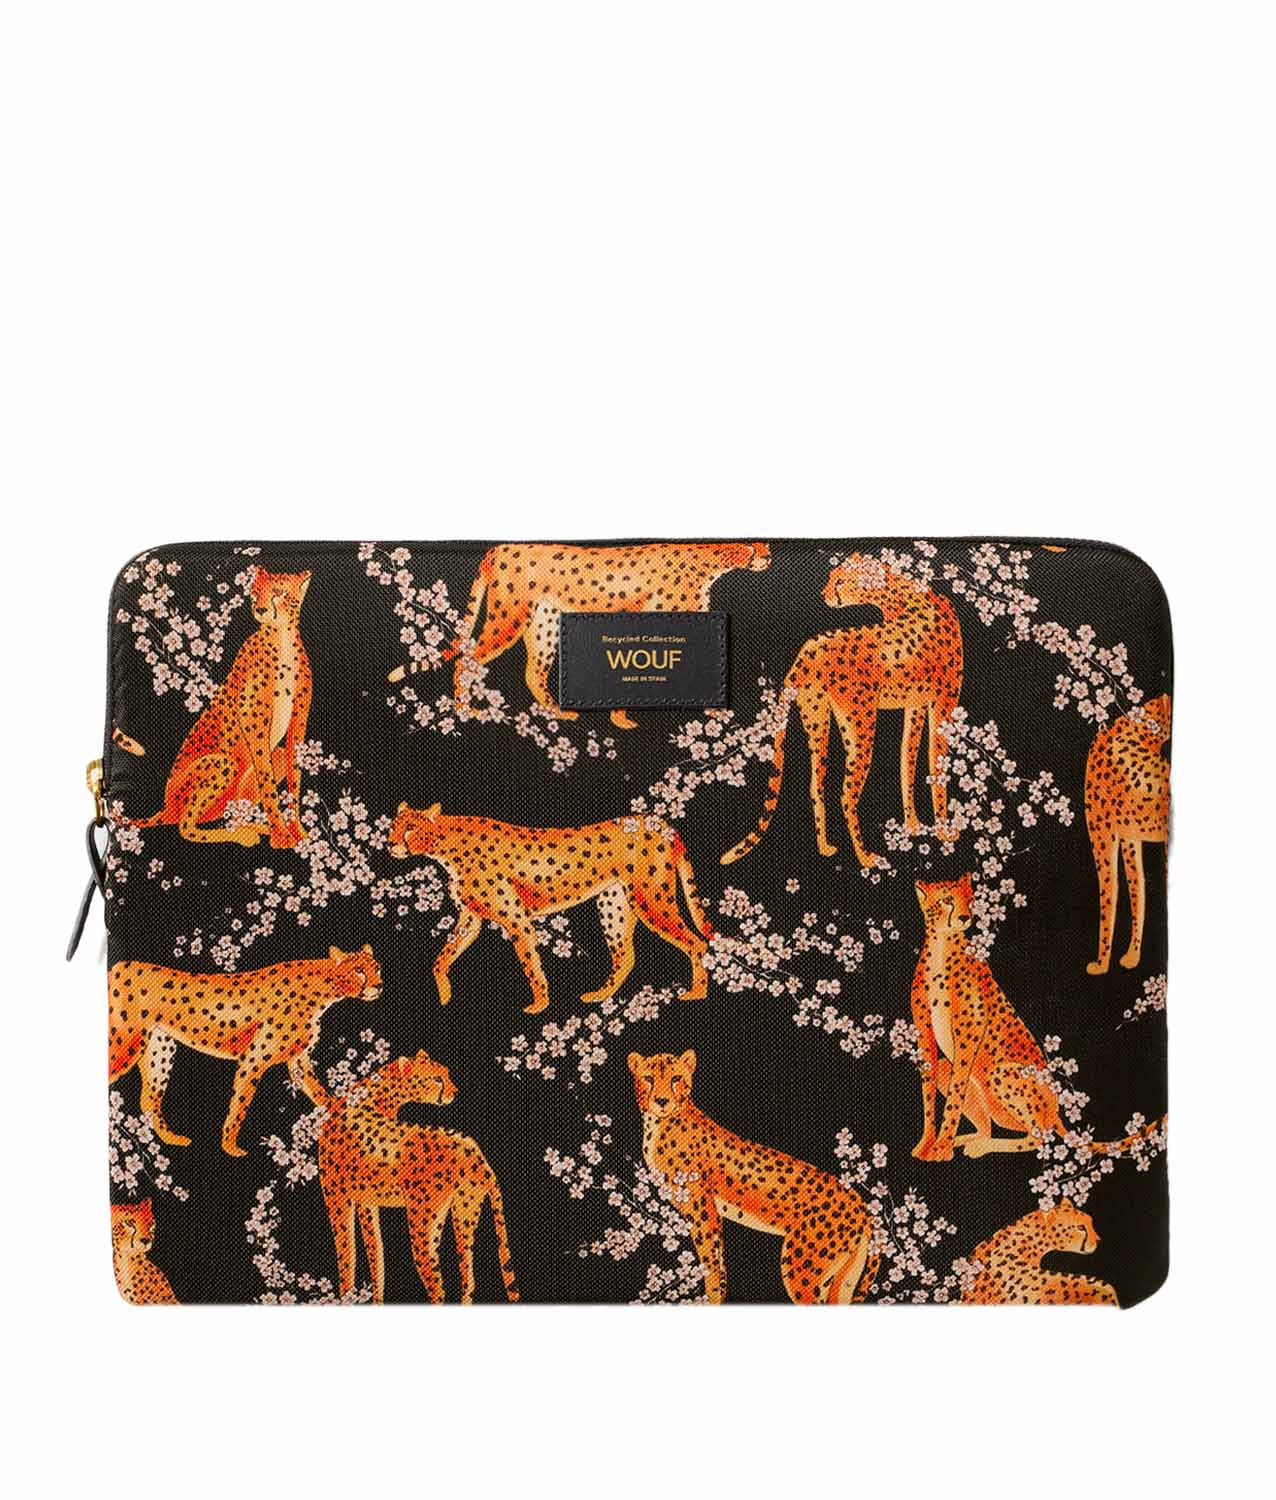 Wouf Salome 13-14inch Laptop Sleeve